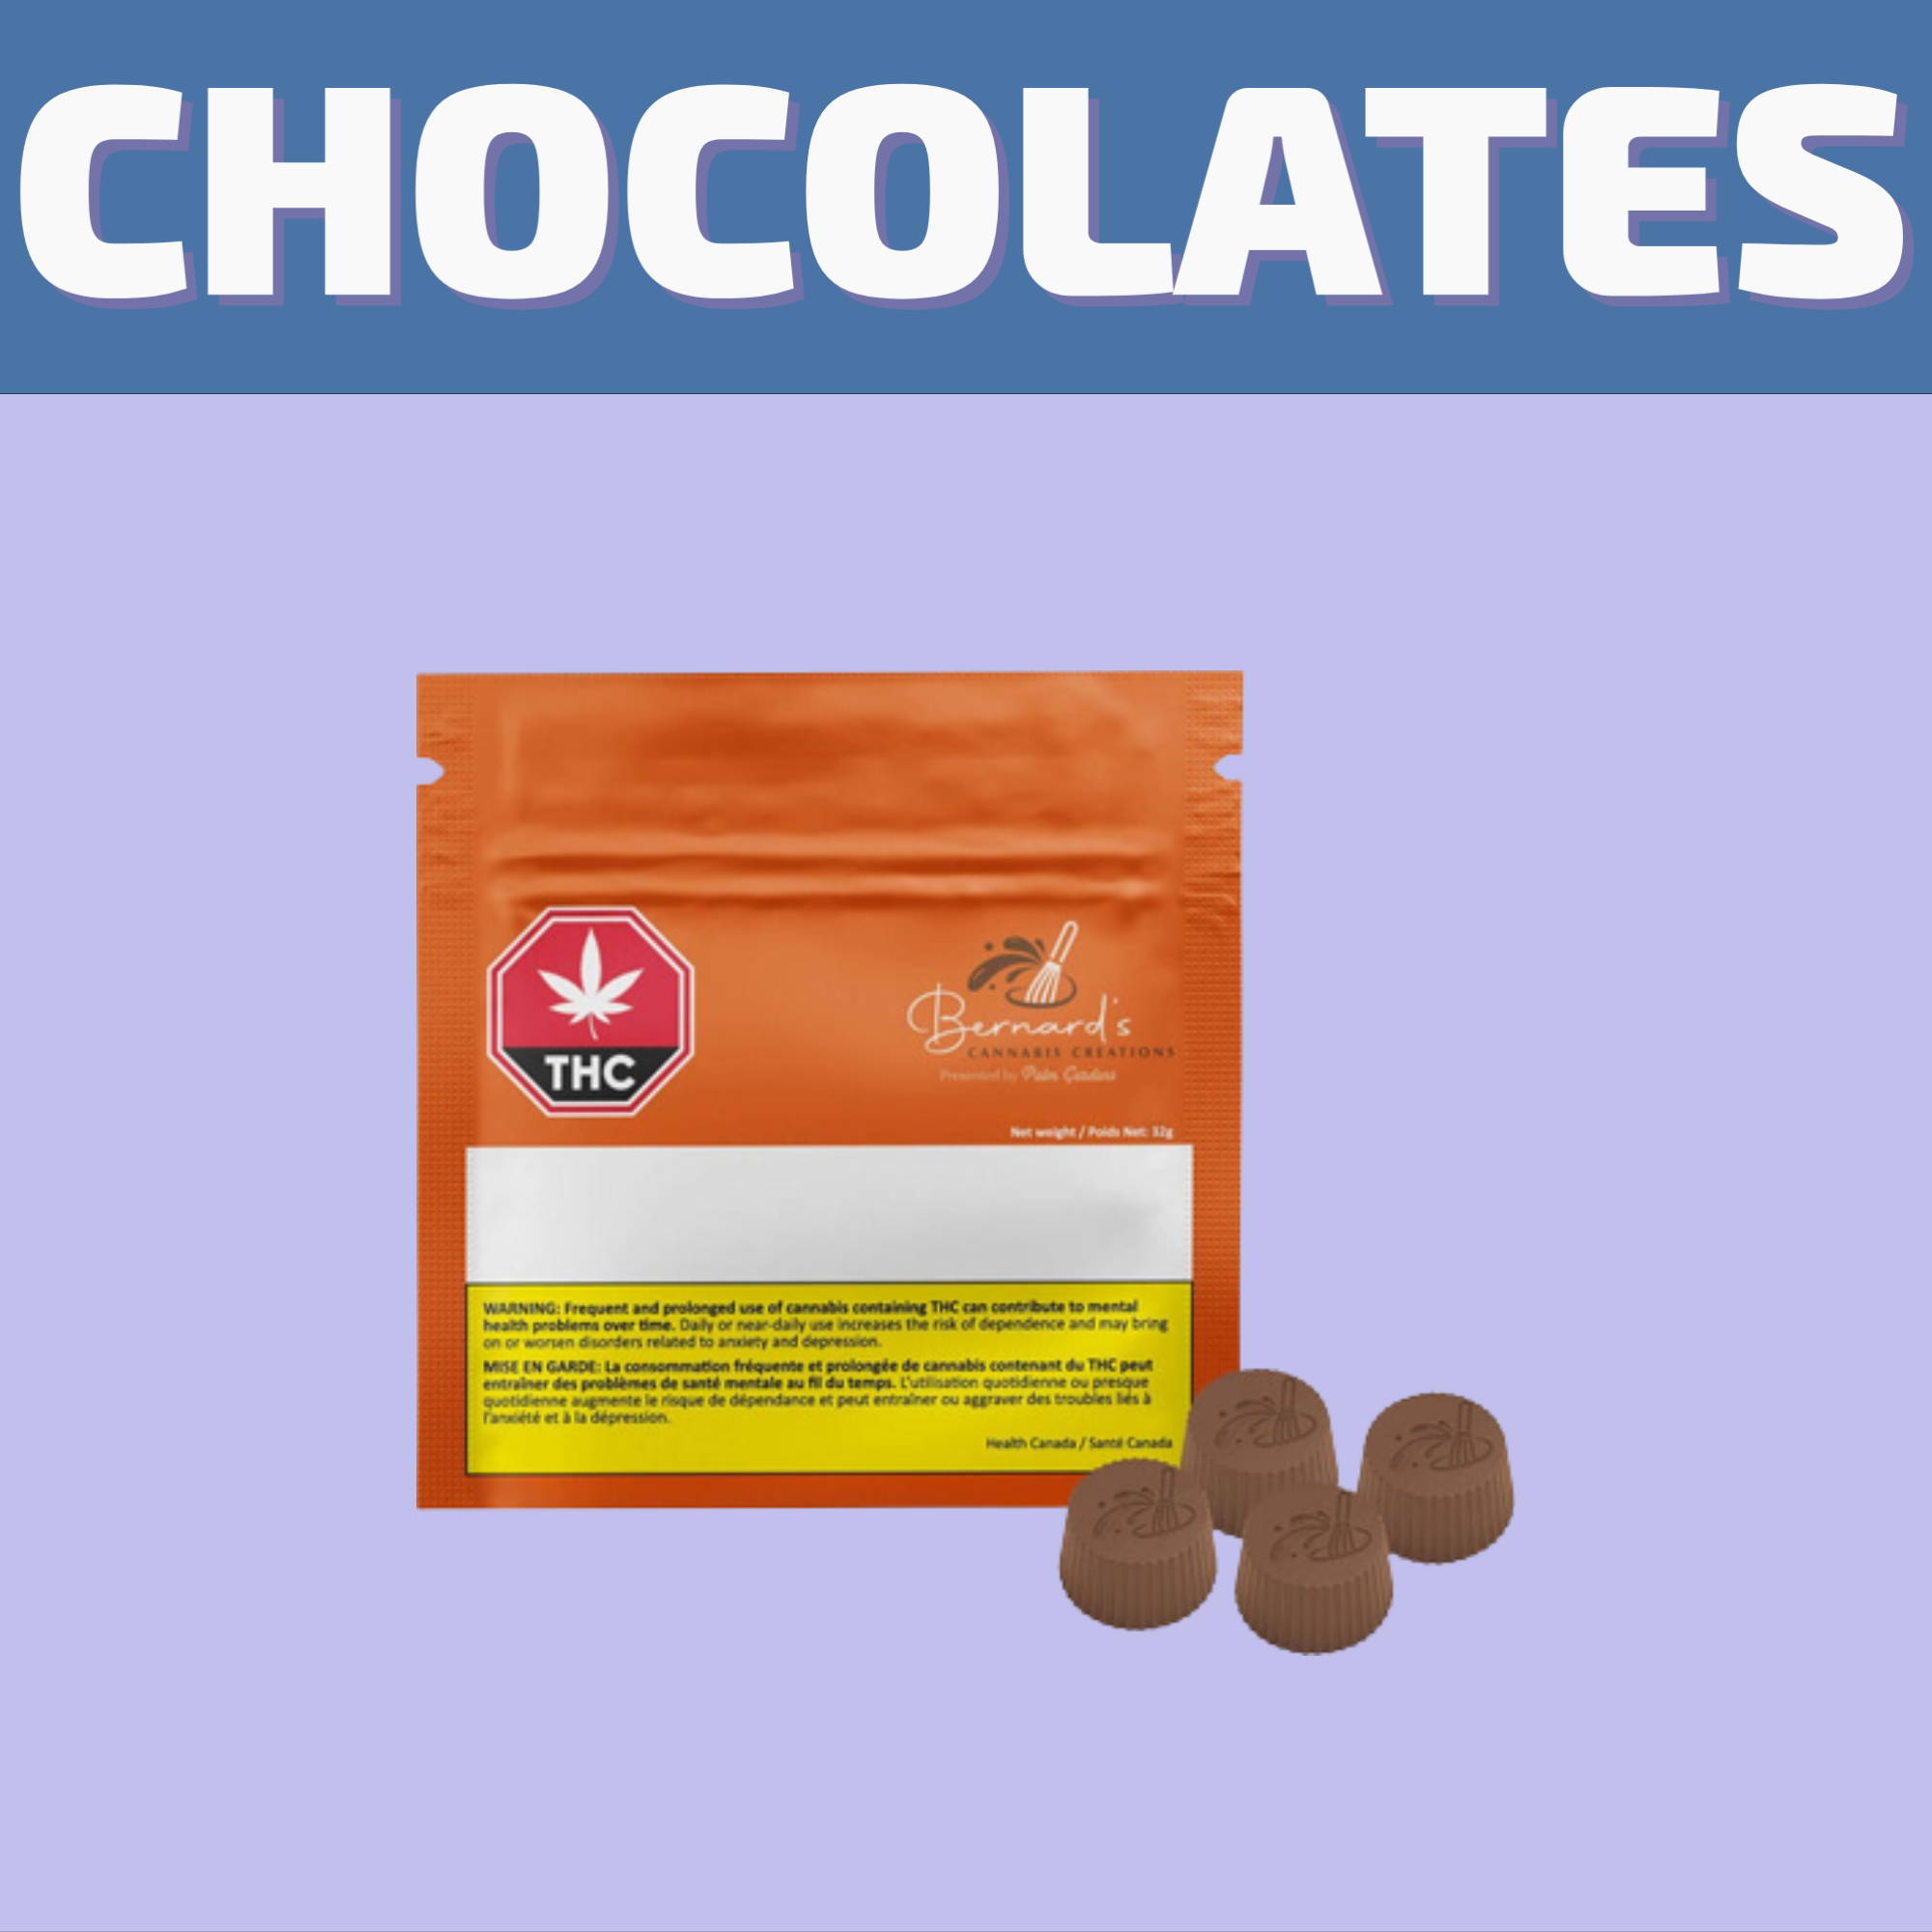 Shop our selection of THC and CBD infused chocolates and other edibles at our cannabis store in Winnipeg on 580 Academy Road or order online.  